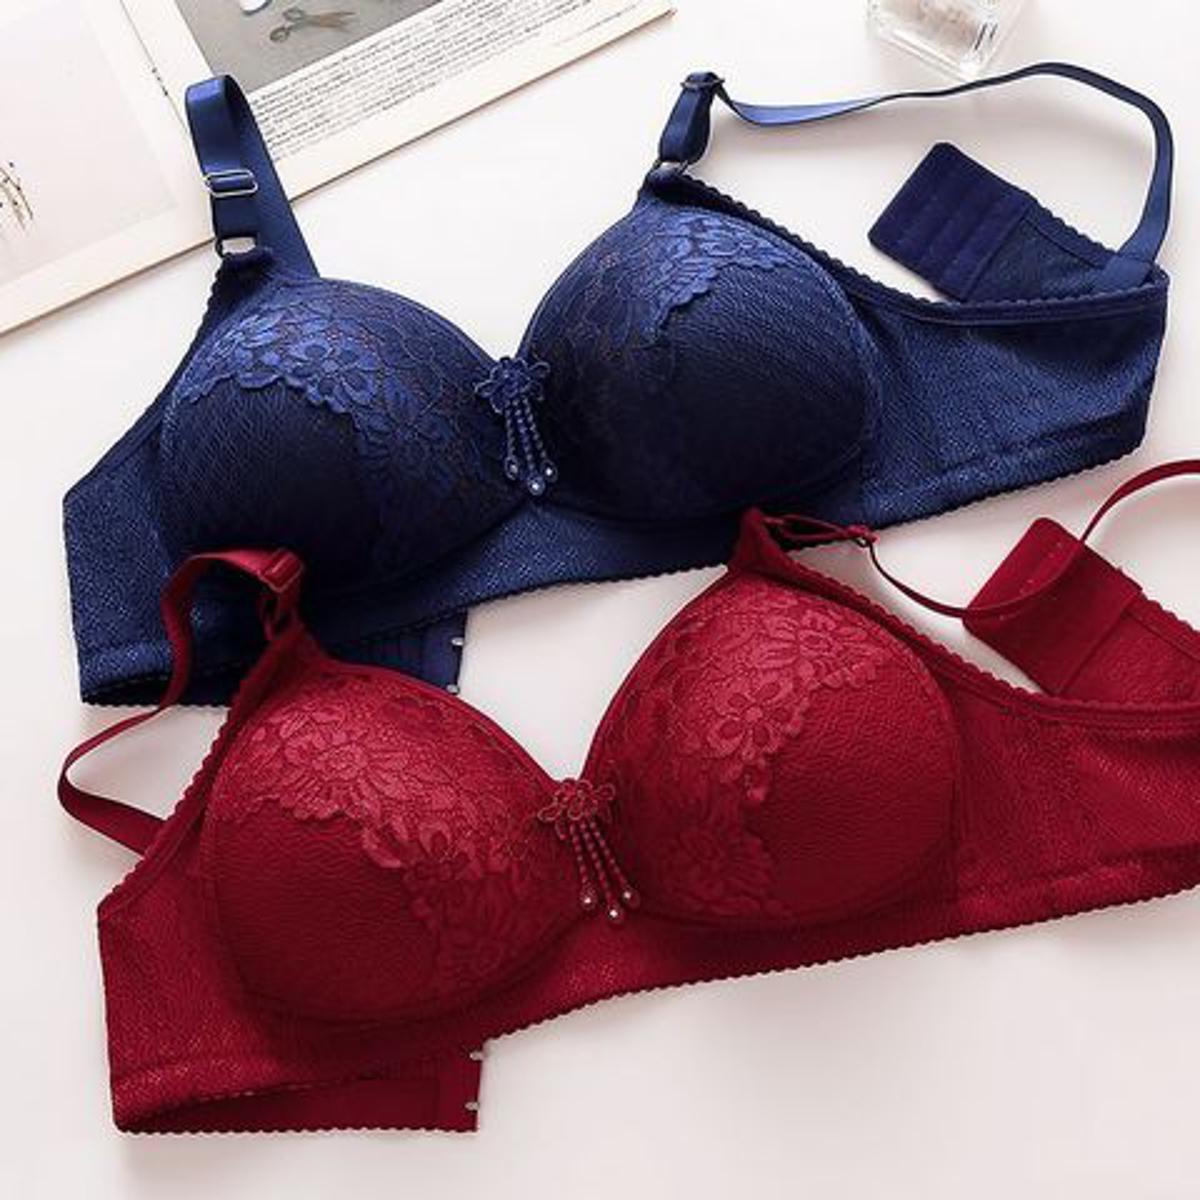 Women Adjustable Straps Wire Free Cotton Soft Foam Padded Bras Back Closure  Big Size bra for women and girls Cup Size B C D Size 36 To 50 (we can send  any color)